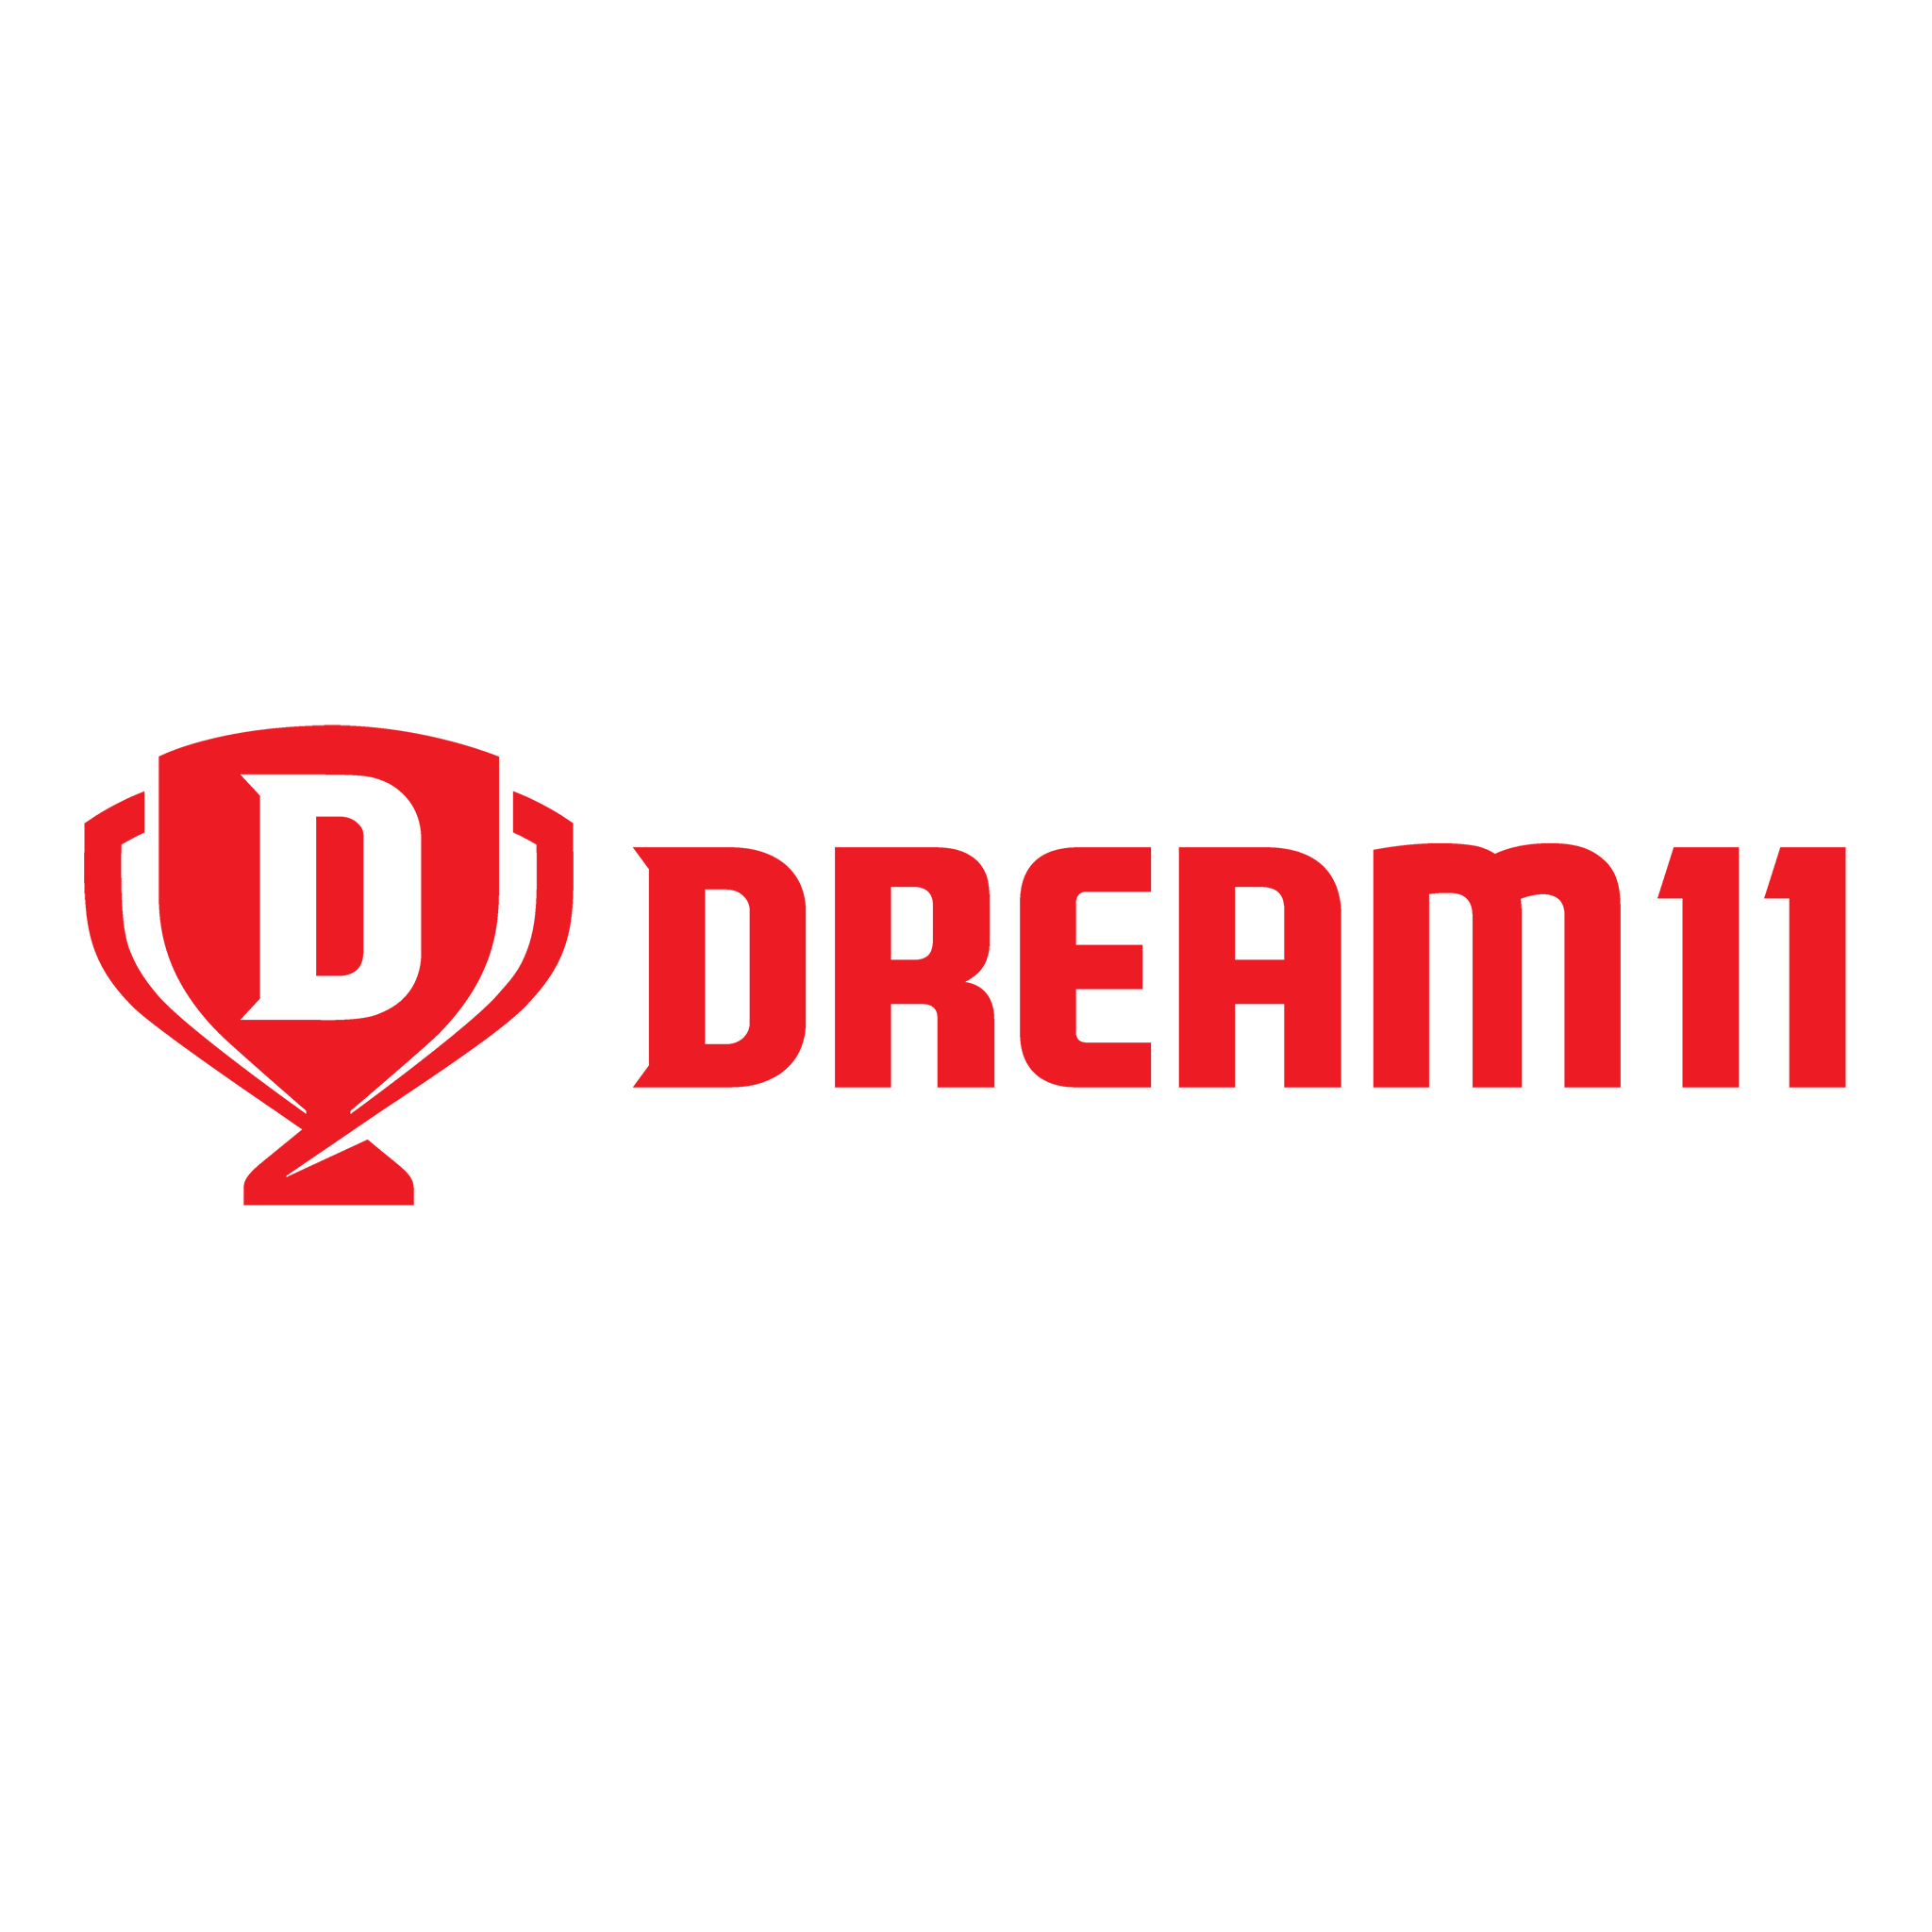 Dream11 Logo PNG Image Free Download searchpng.com